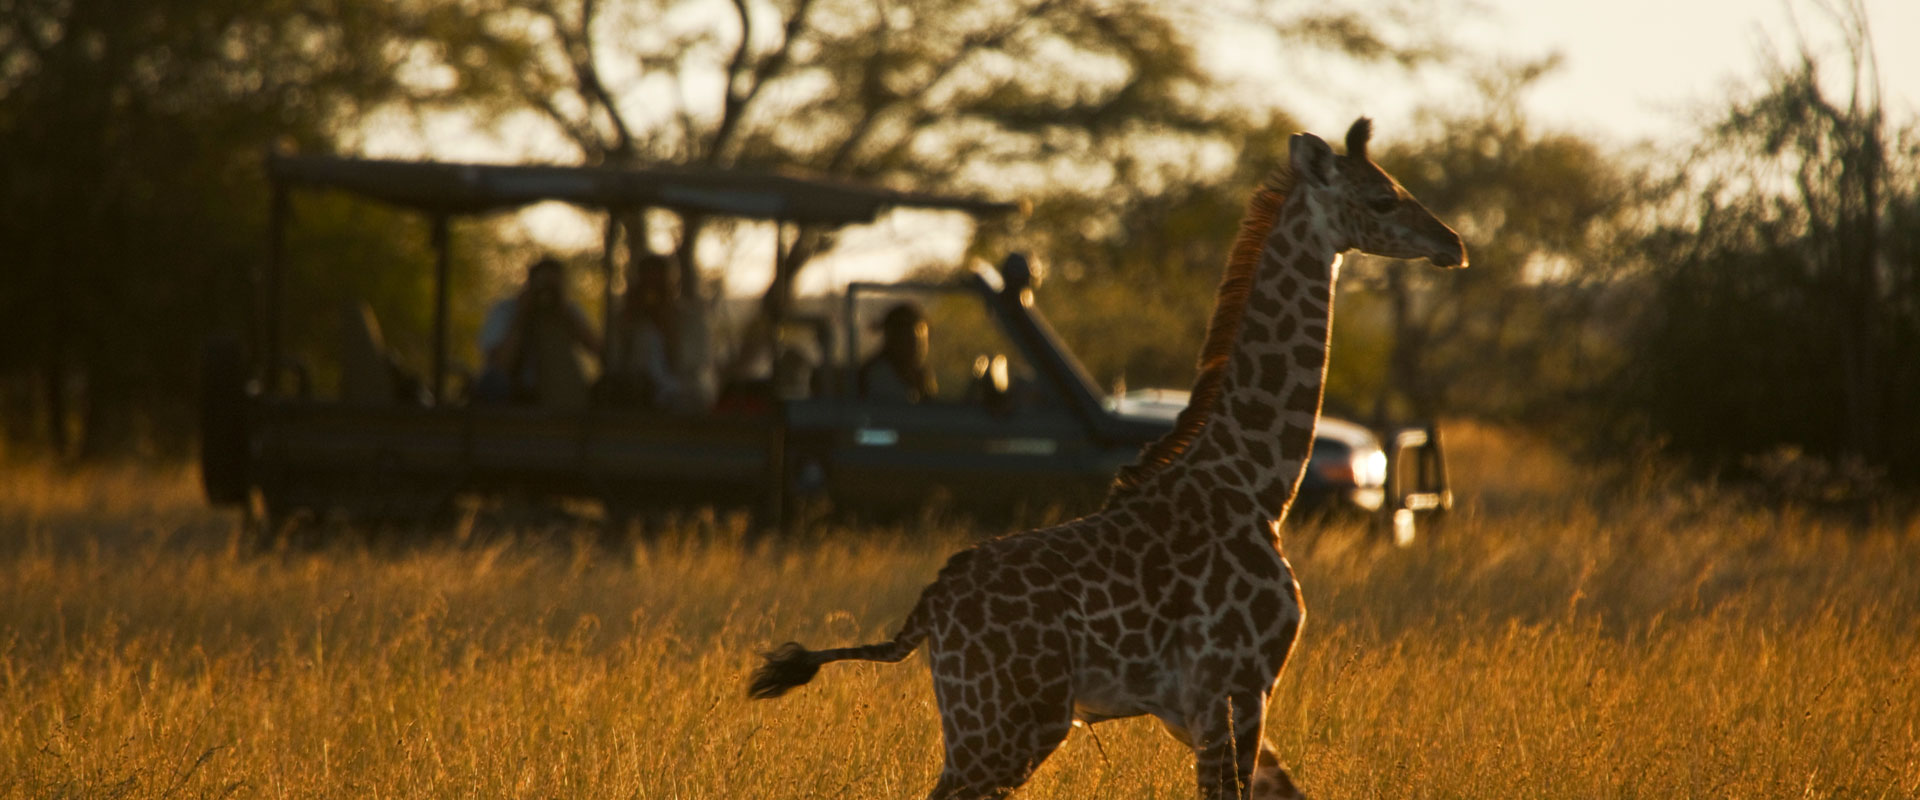 Best Time to Travel to… Kenya, Tanzania & South Africa